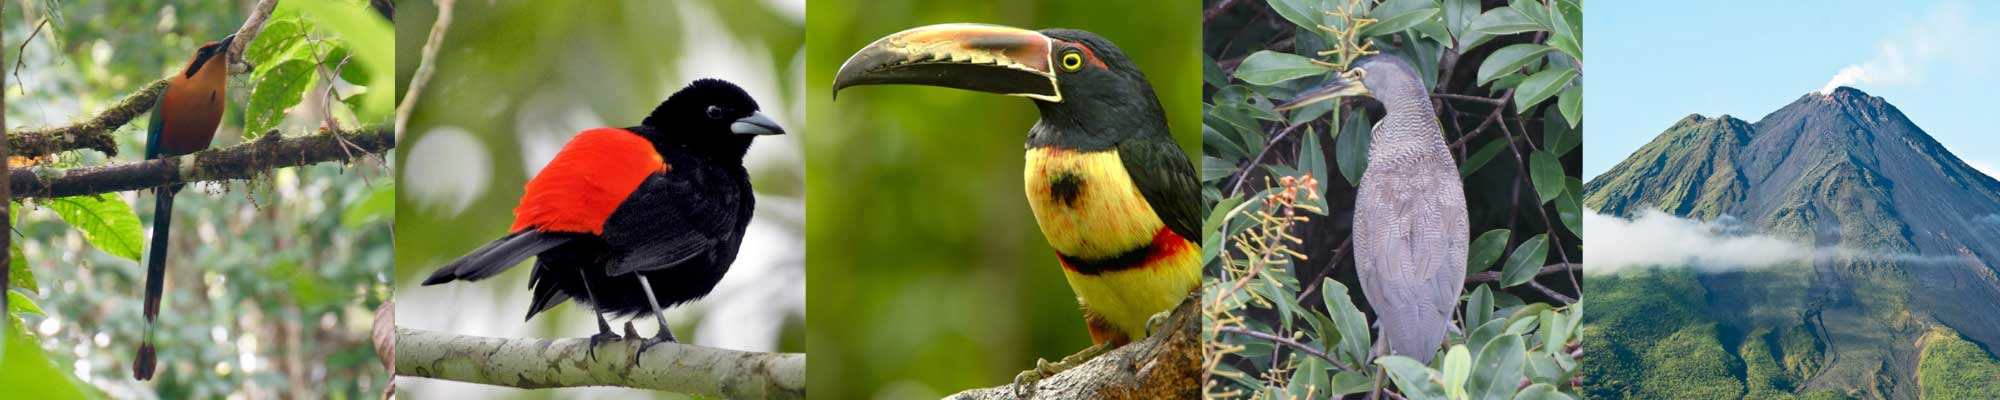 Five images in a row: a motmot bird with an orange body and long tail perched on a branch; a tanager with black body and red wings perched on a branch; a toucan with a yellow breast and black and yellow beak; a grey heron in the brush from behind; a dormant volcano covered in trees.